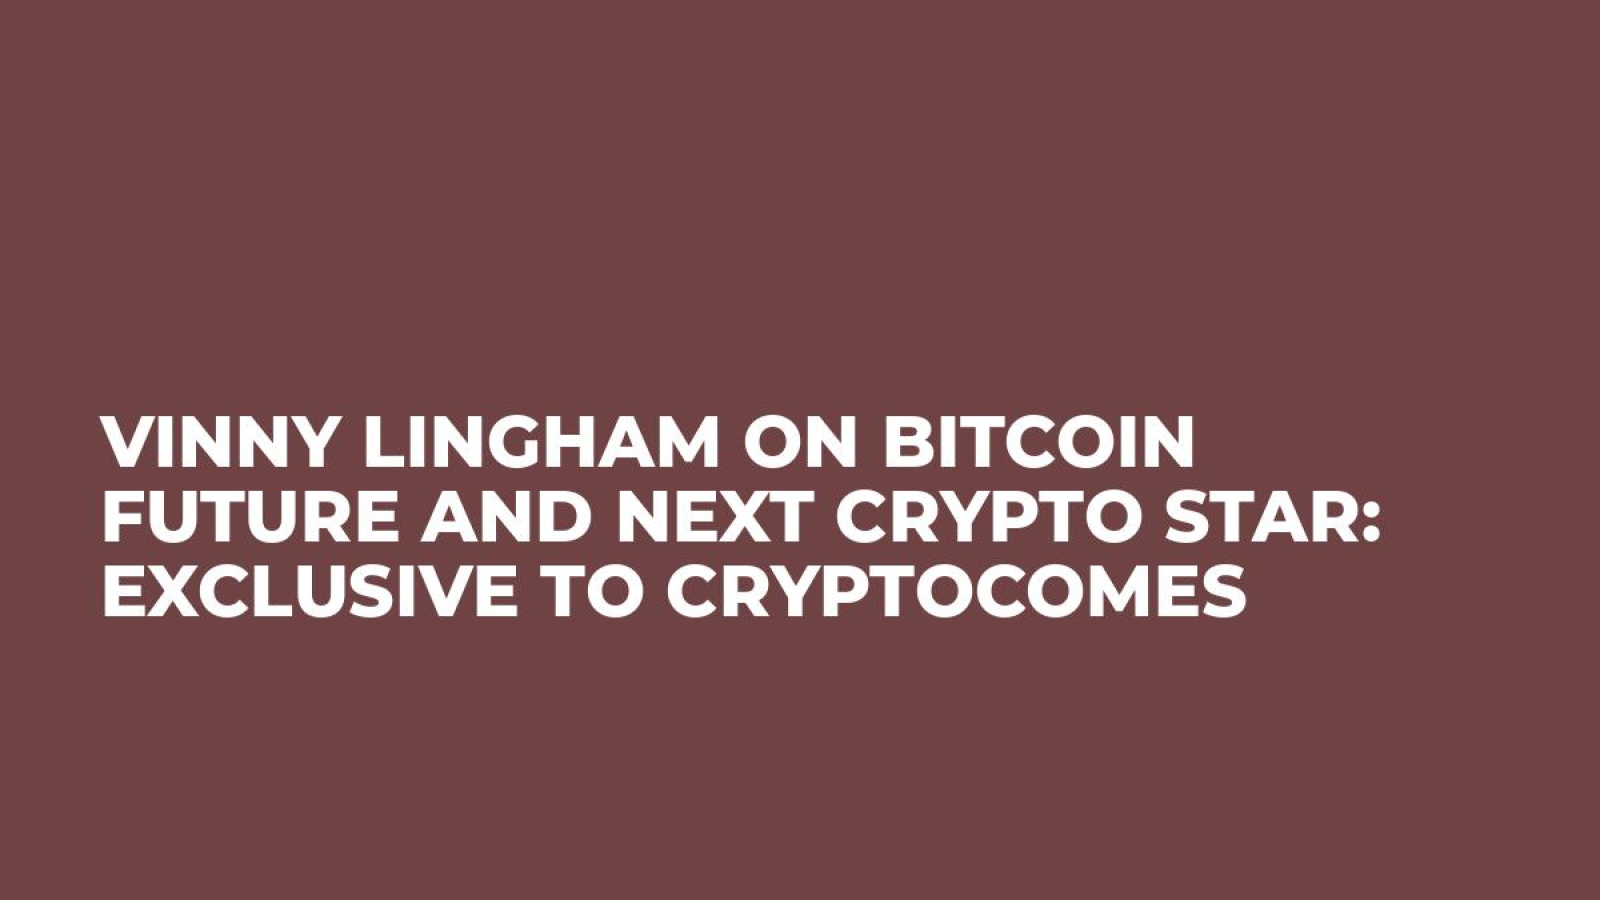 Vinny Lingham On Bitcoin Future and Next Crypto Star: Exclusive to CryptoComes